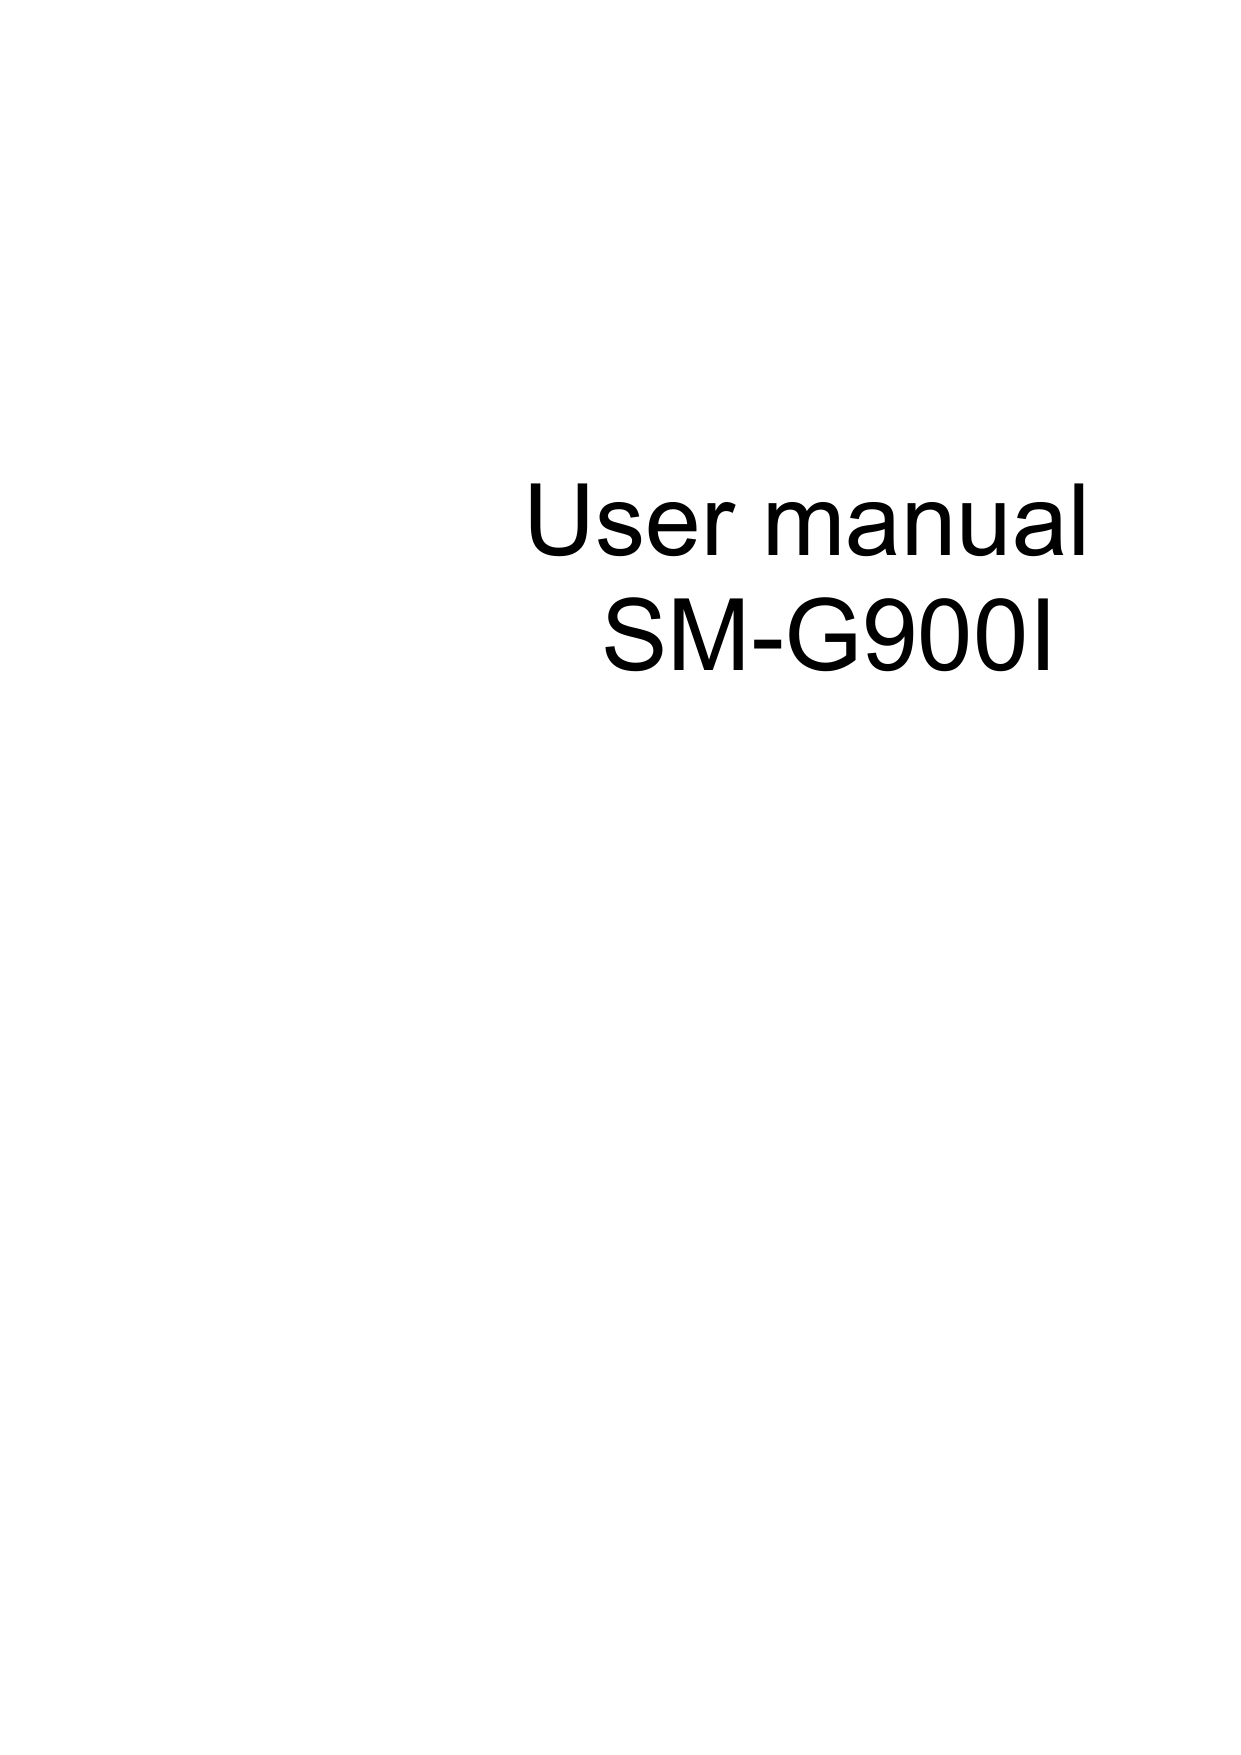 User manual SM-G900I This device is capable of operating in 802.11a/n/ac mode. For 802.11a/n/ac devices operating in the frequency range of 5.15 - 5.25 GHz, they are restricted to indoor operations only to reduce any potential harmful interference for Mobile Satellite Services (MSS) in the US. WIFI Access Points that are capable of allowing your device to operate in 802.11a/n/ac mode (5.15 - 5.25 GHz band) are optimized for indoor use only. If your WIFI network is capable of operating in this mode, please restrict your WIFI use indoors to not violate federal regulations to protect Mobile Satellite Services.Draft 6.1 2012-09-08 Only for Approval 